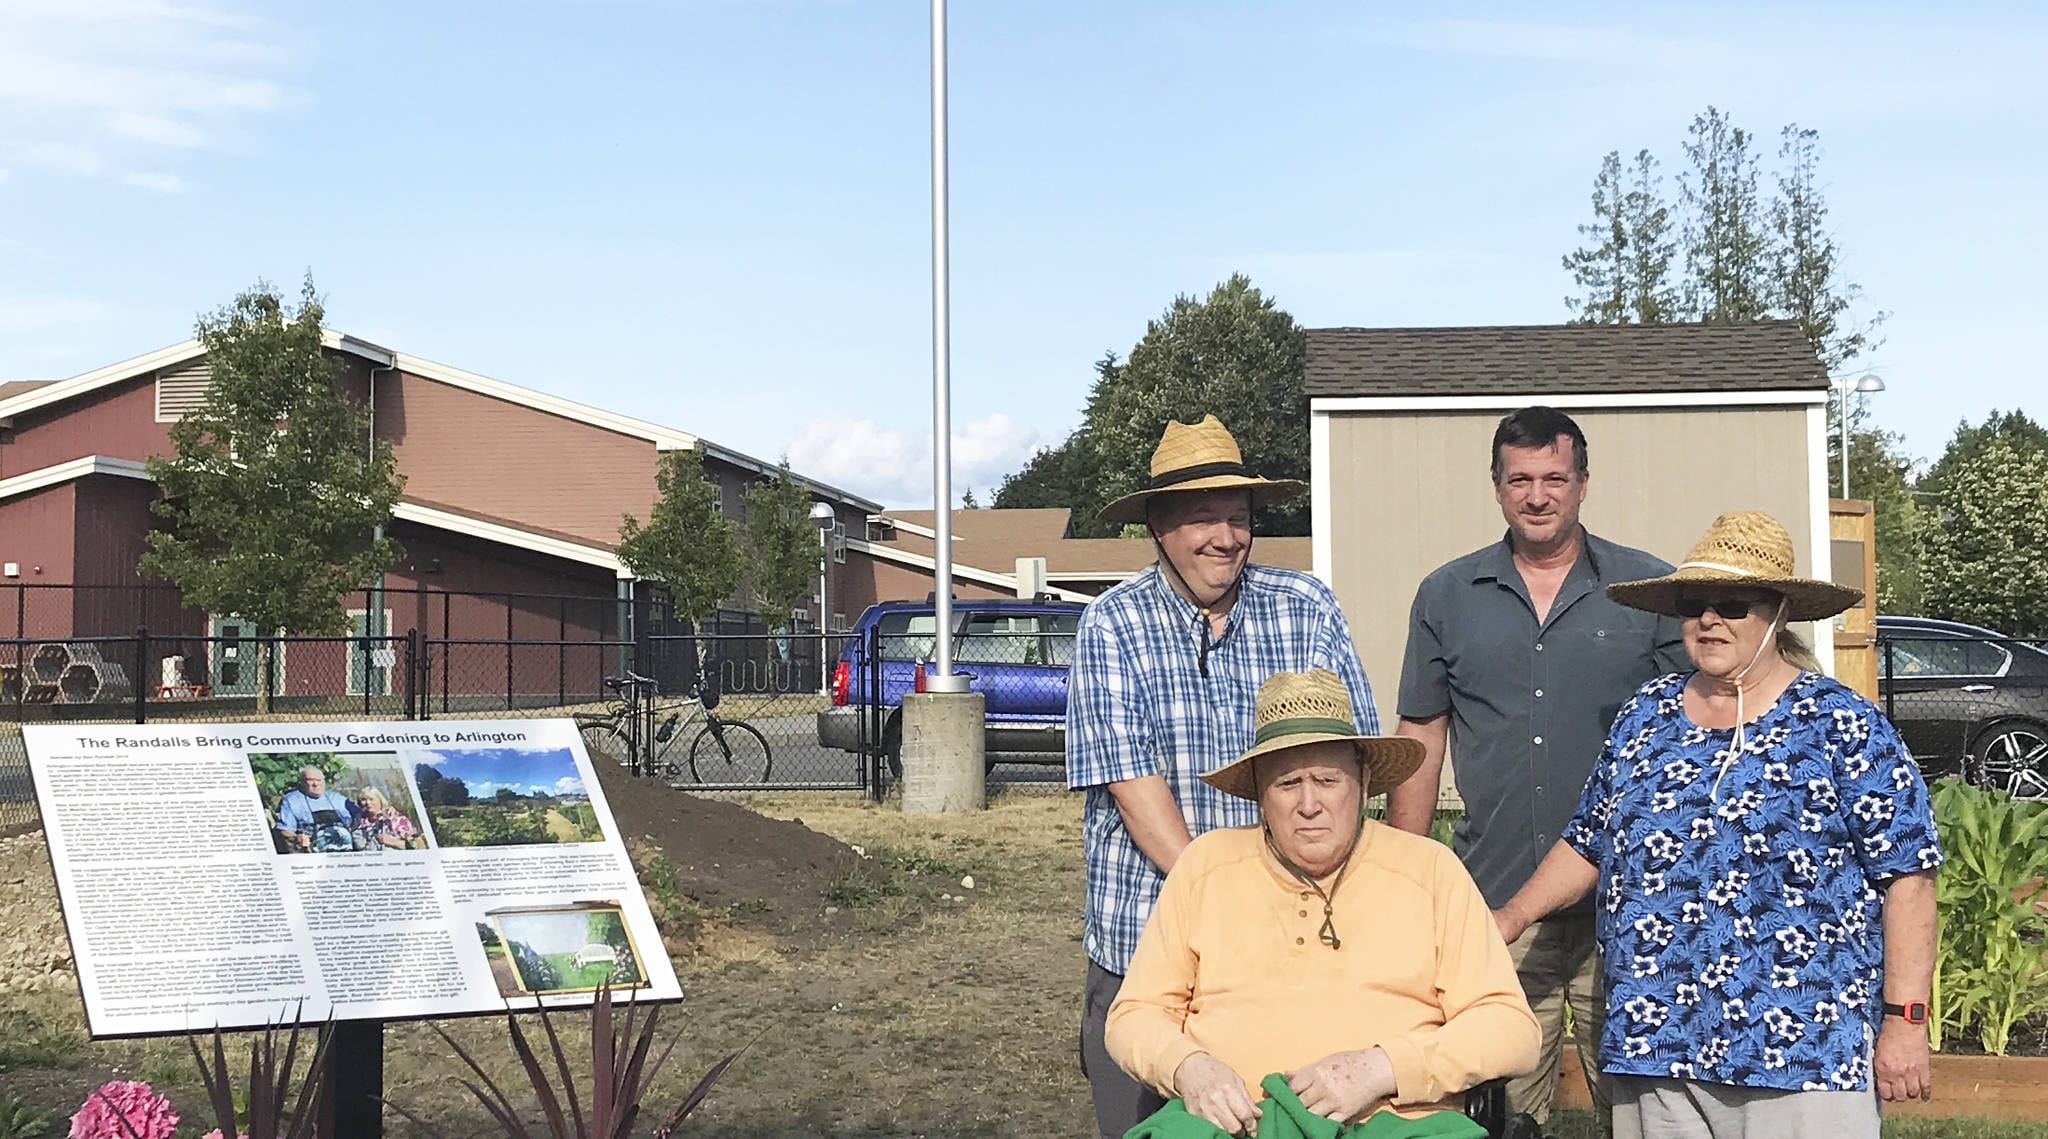 Chuck and Bea Randall were honored for bringing community gardens to Arlington during a ceremony at the new Third Street Garden at 505 E. Third Street. Pictured here with sons Aaron, left, and Bill.